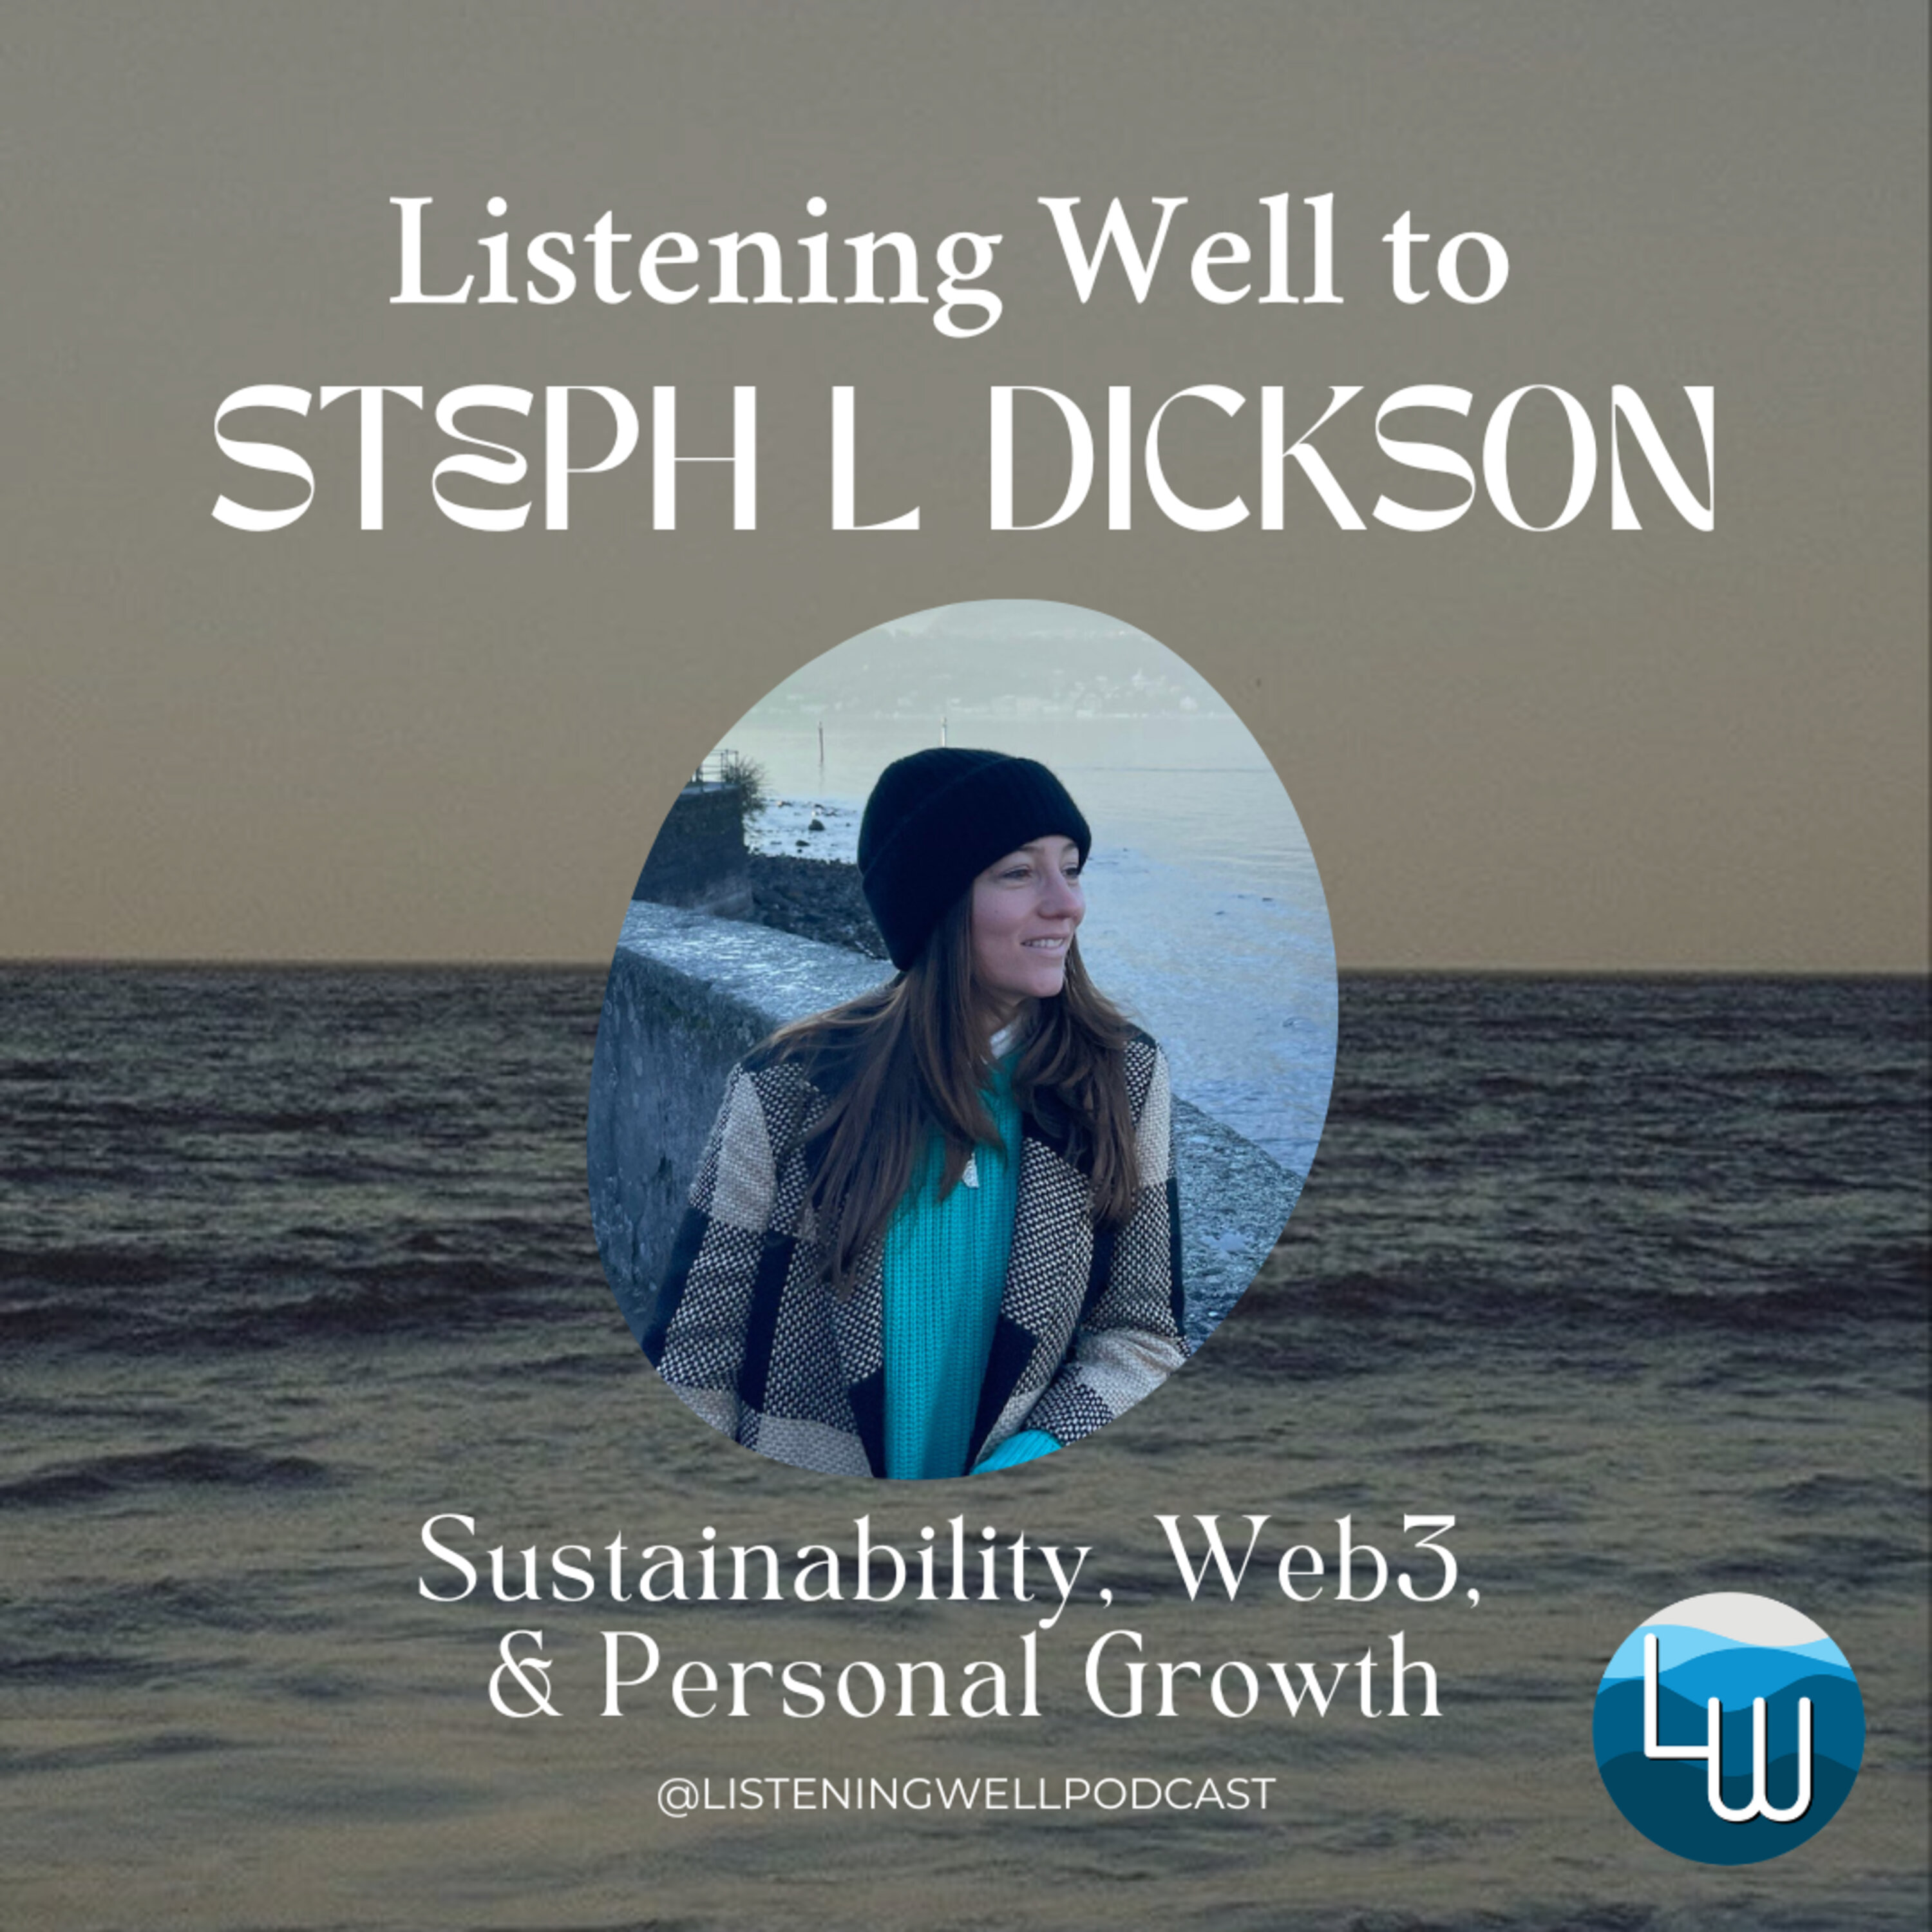 Sustainability, Web 3, and Personal Growth with Stephanie Dickson